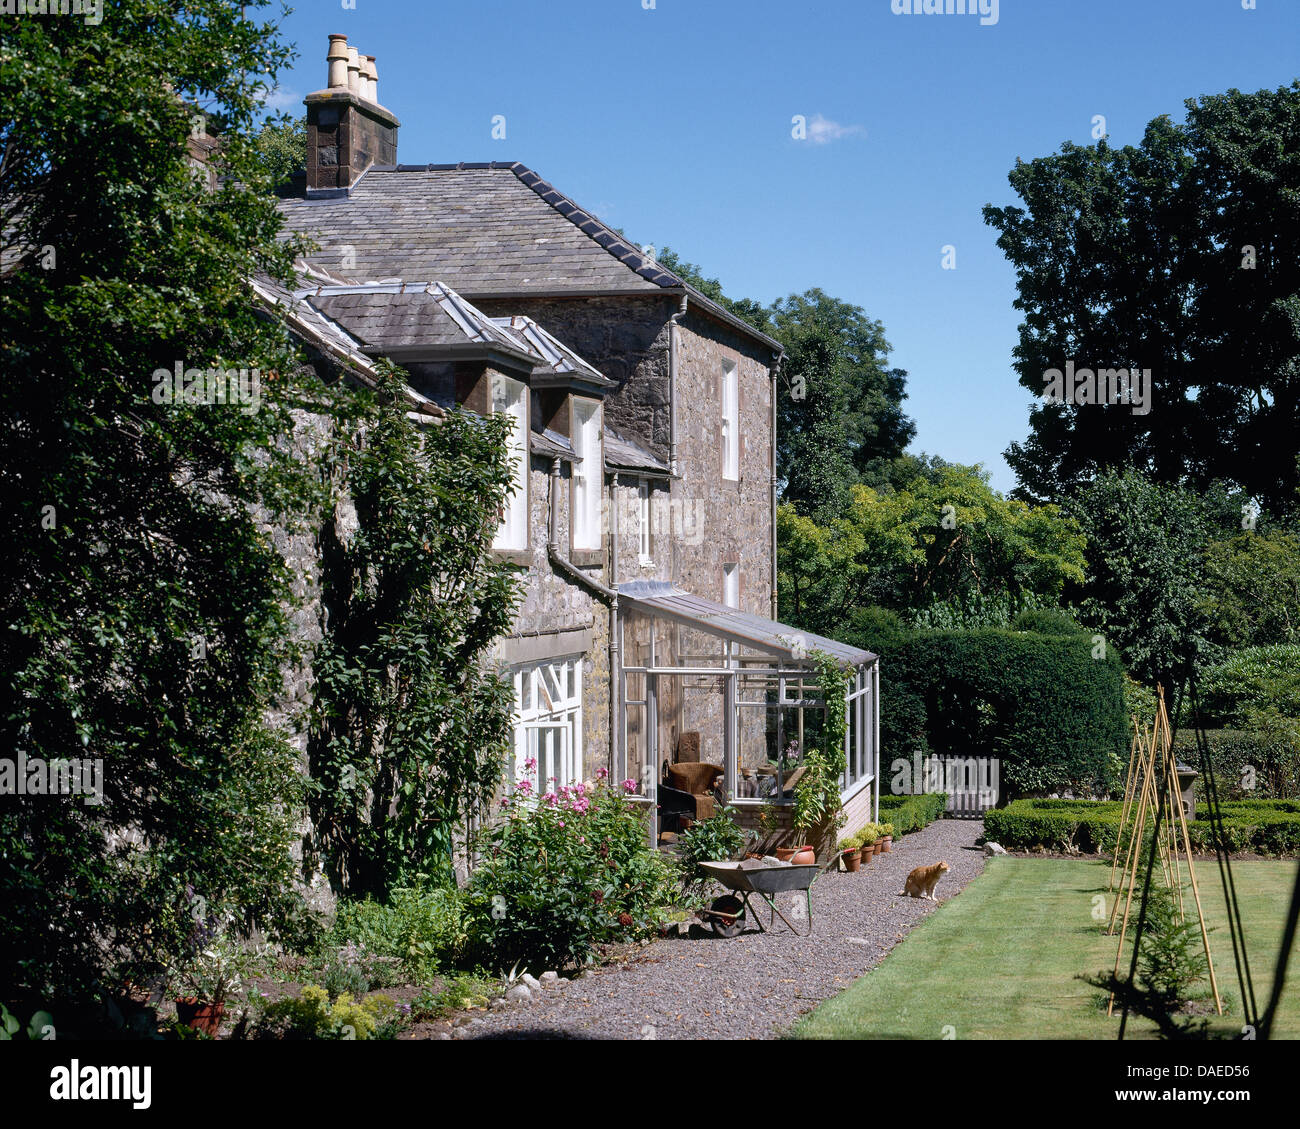 Exterior of stone country manor house with gravel path between house and newly mown lawn Stock Photo